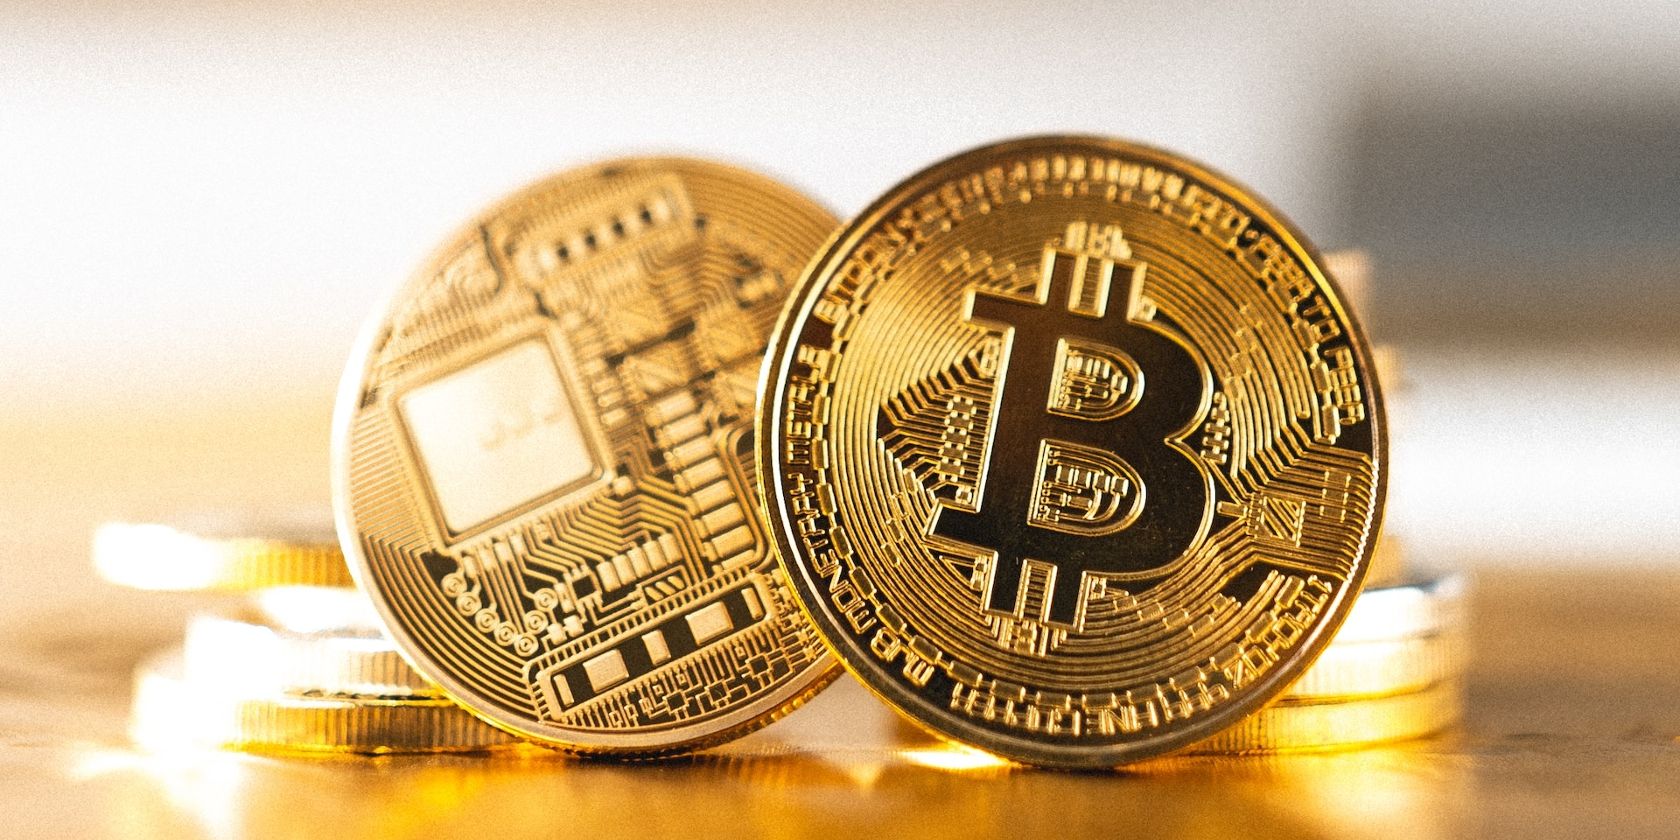 Two coins, one with the Bitcoin logo, placed upright beside other coins on a table